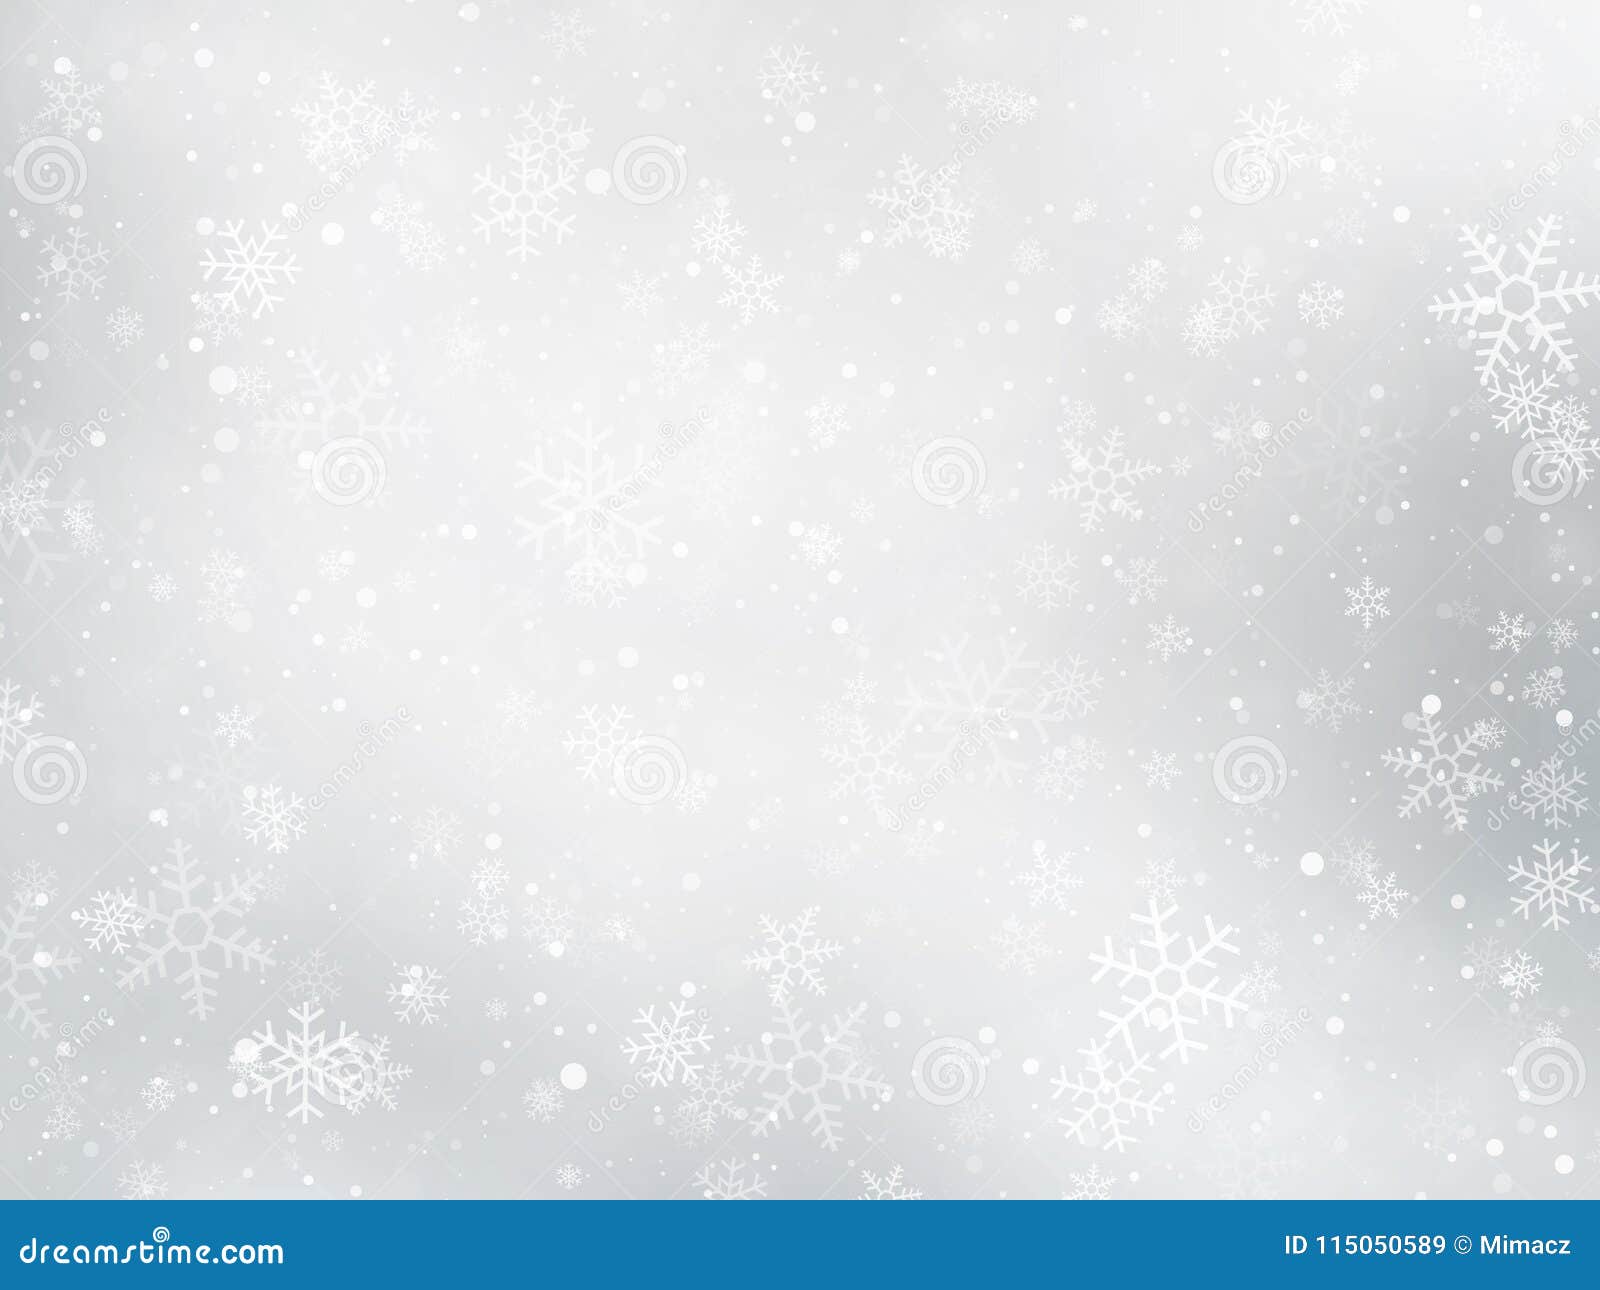 silver winter christmas background with snowflakes